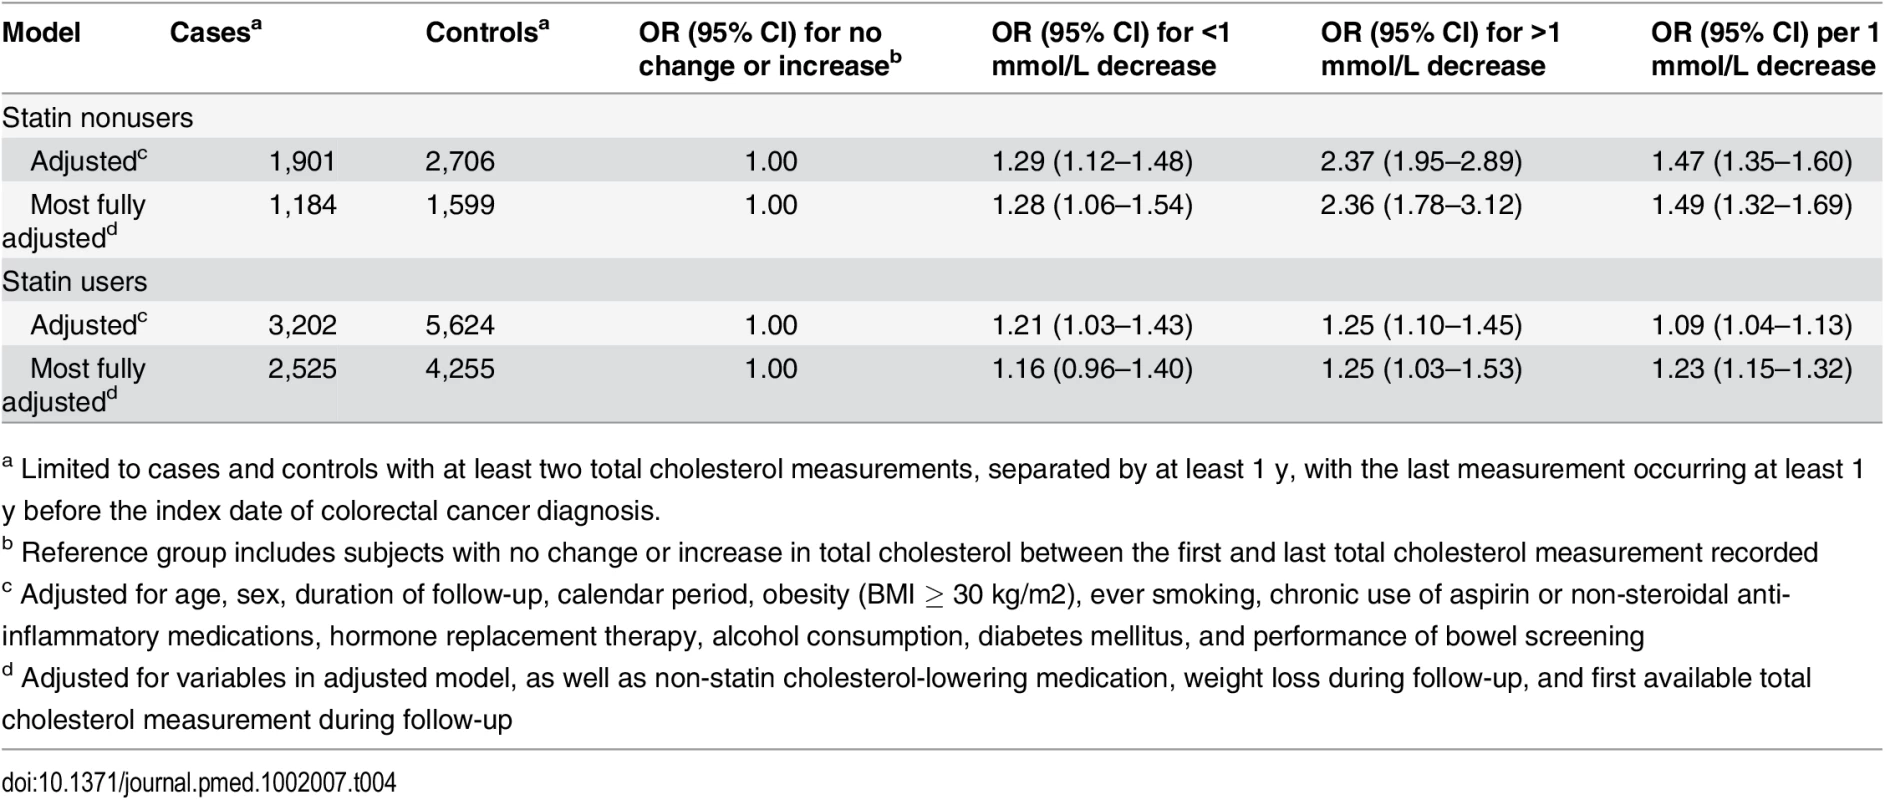 ORs for colorectal cancer risk by change in serum total cholesterol.